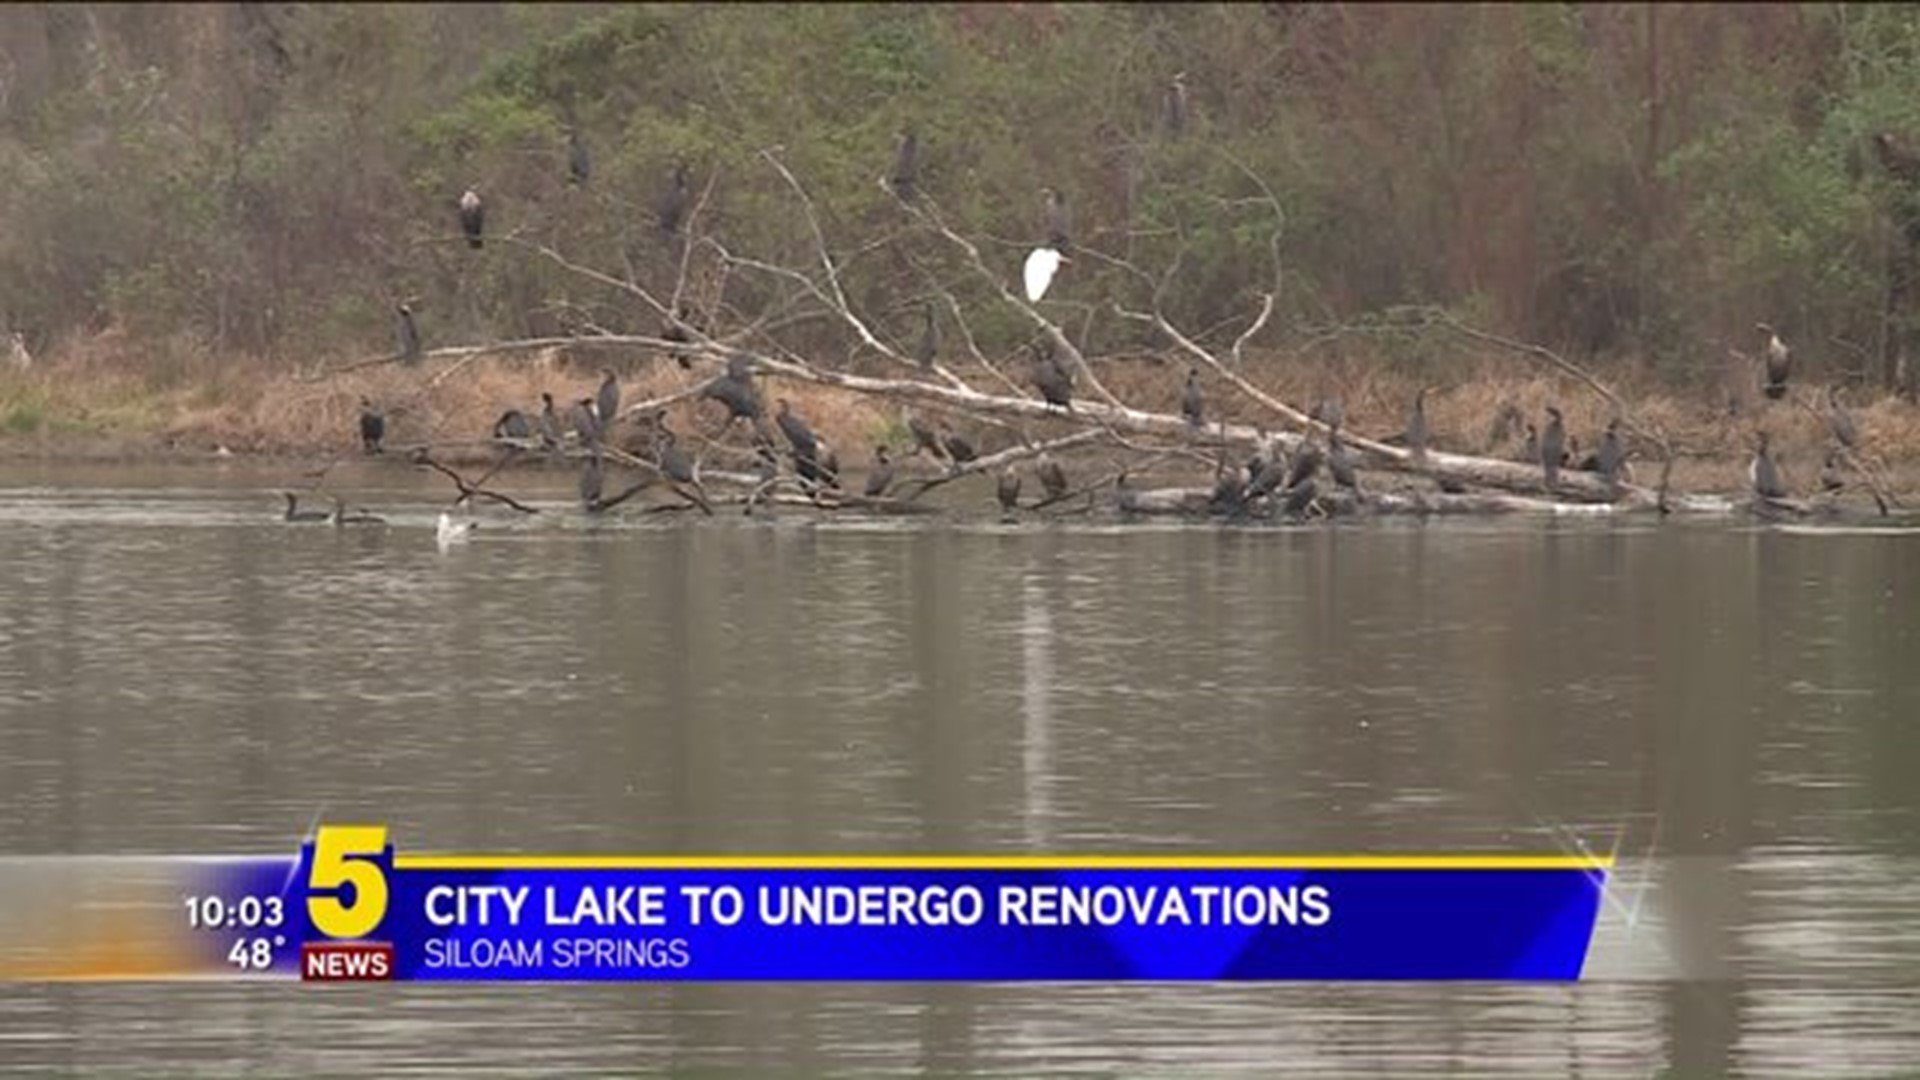 Siloam Springs Makes Plans To Make City Lake A Regional Attraction